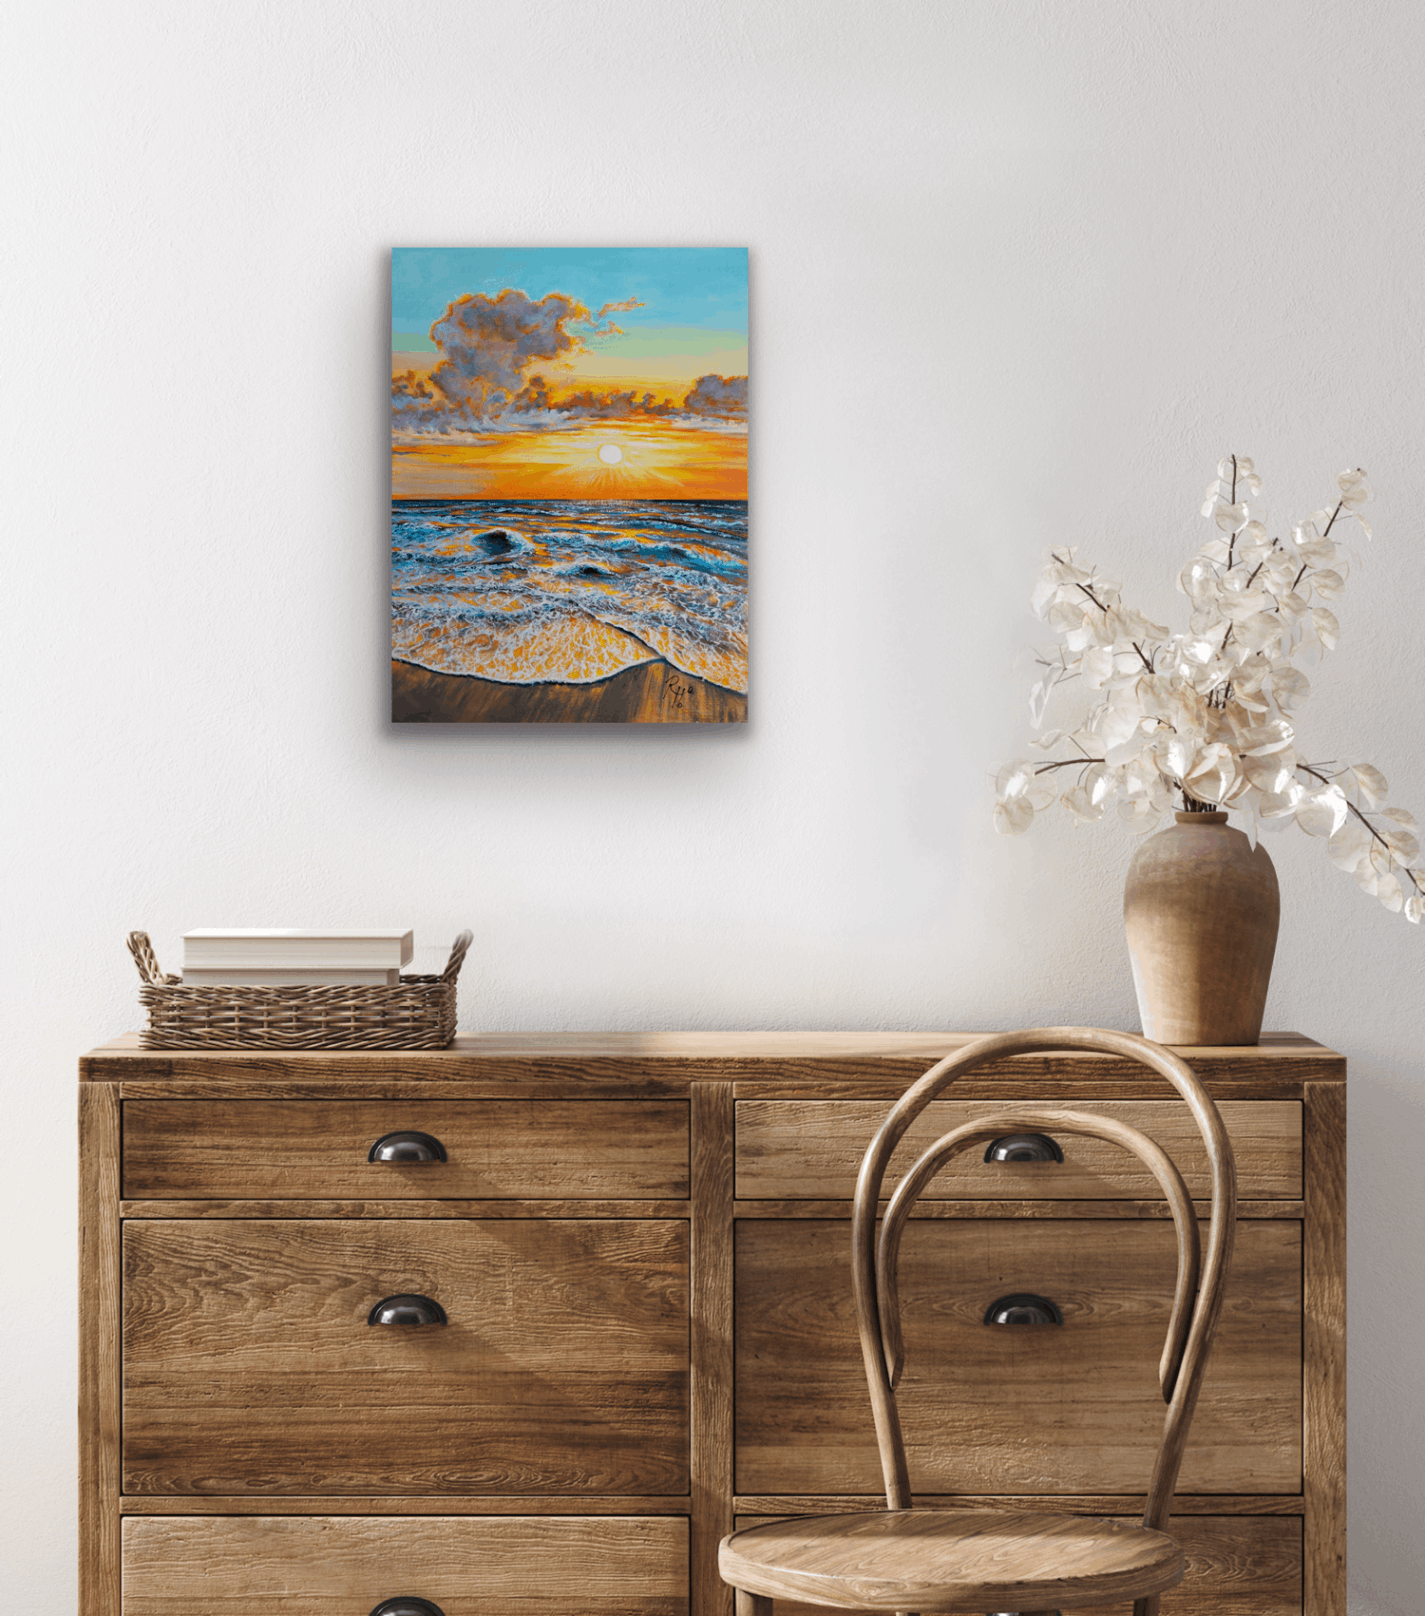 This original painting is of a stunning sunset over a beach with gentle waves.